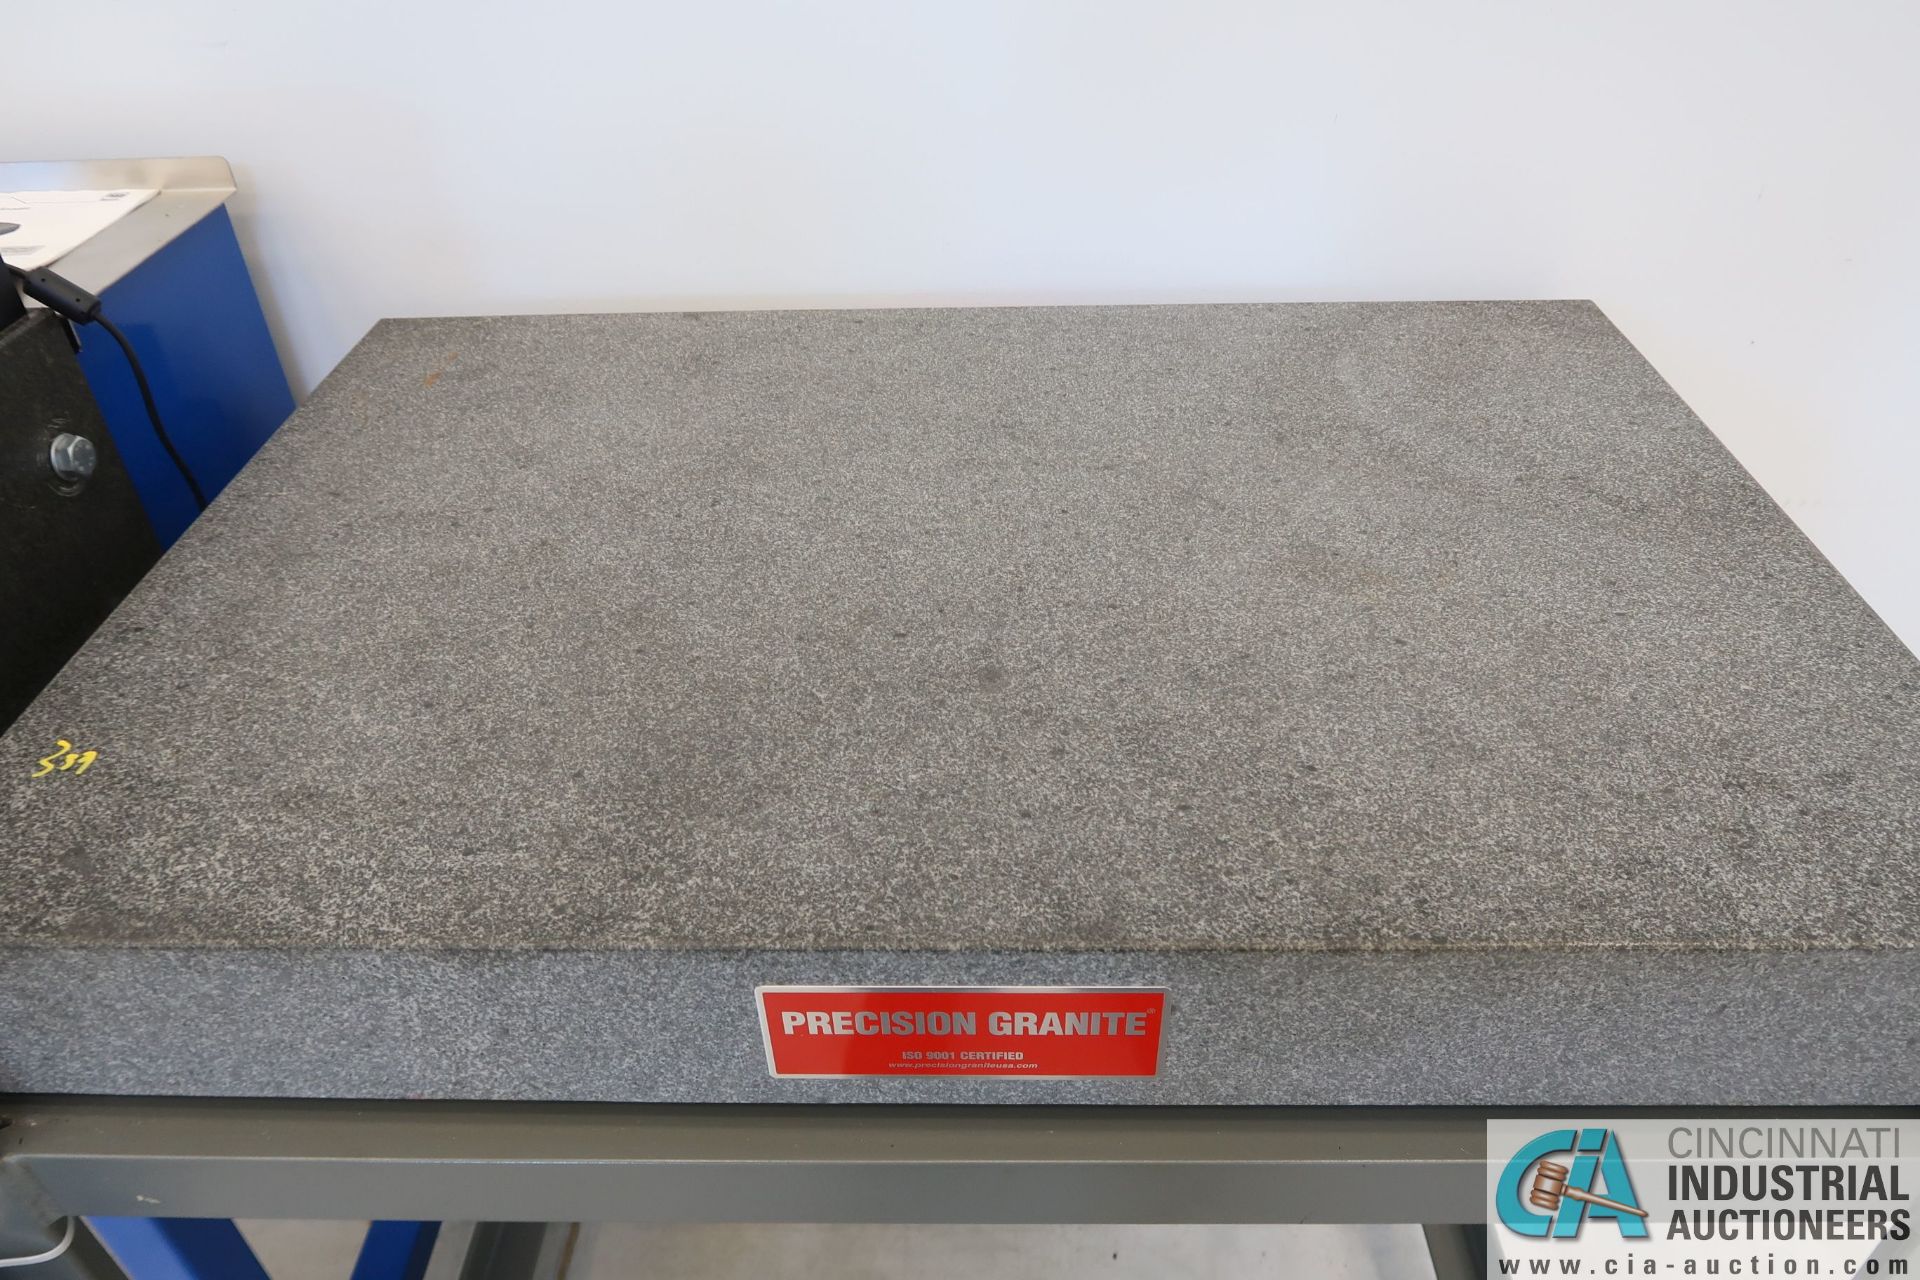 24" X 36" X 4" PRECISION GRANITE SURFACE PLATE WITH STAND - Image 2 of 2